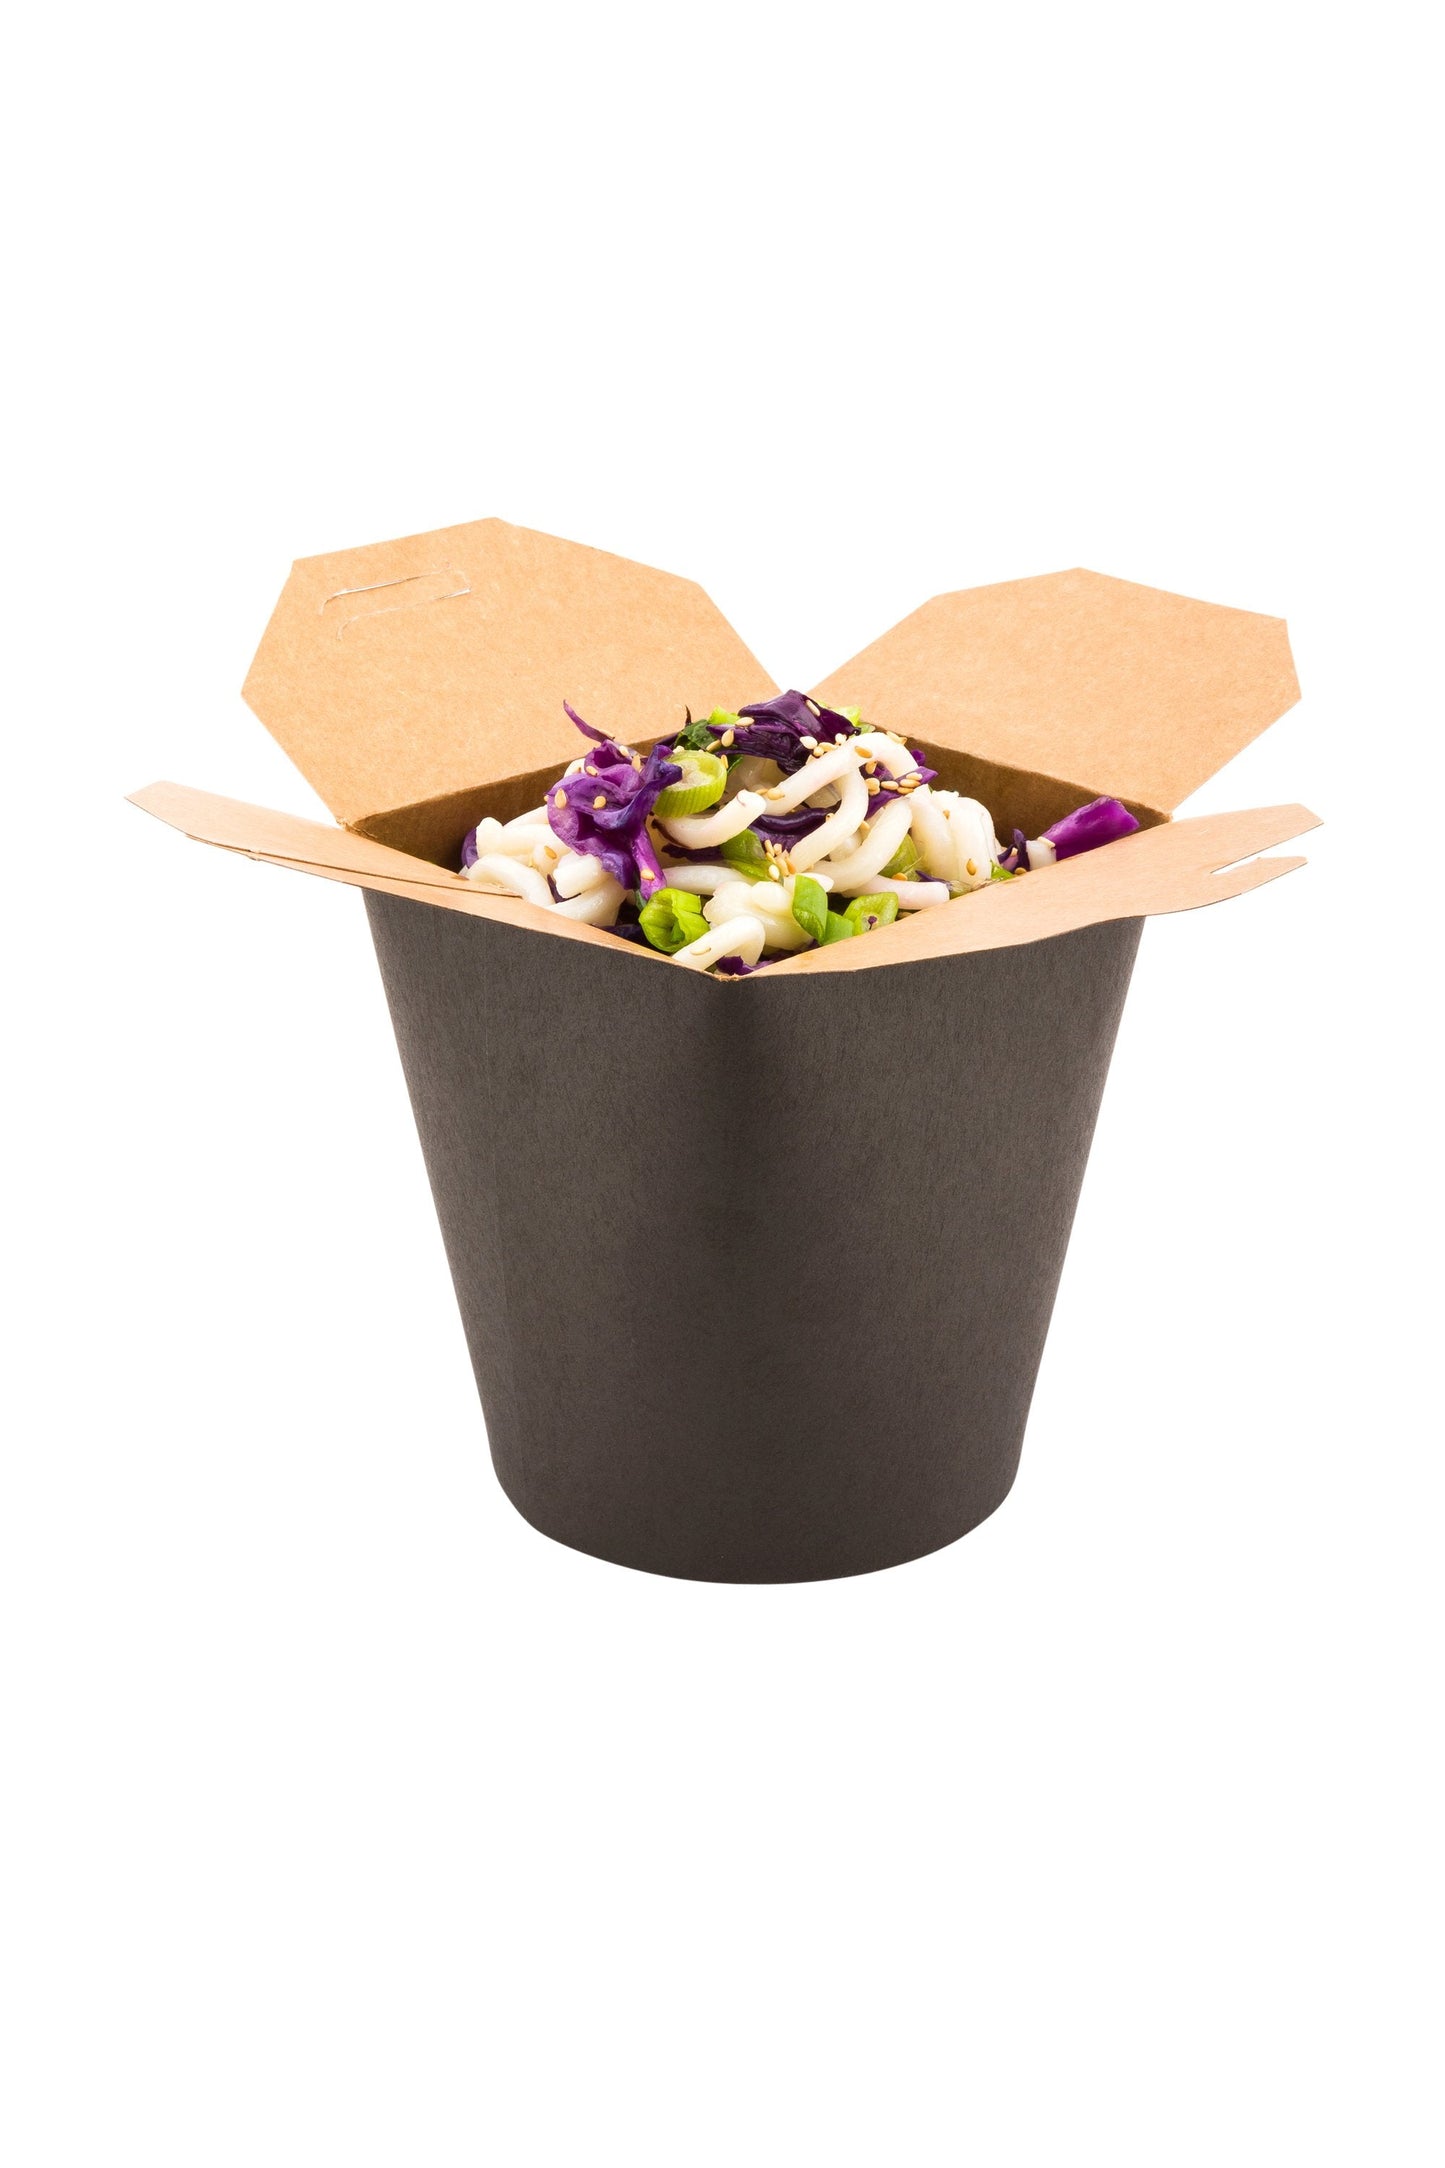 Bio Tek 32 oz Round Black Paper Round Noodle Take Out Container - 4" x 3 1/2" x 4 1/2" - 200 count box